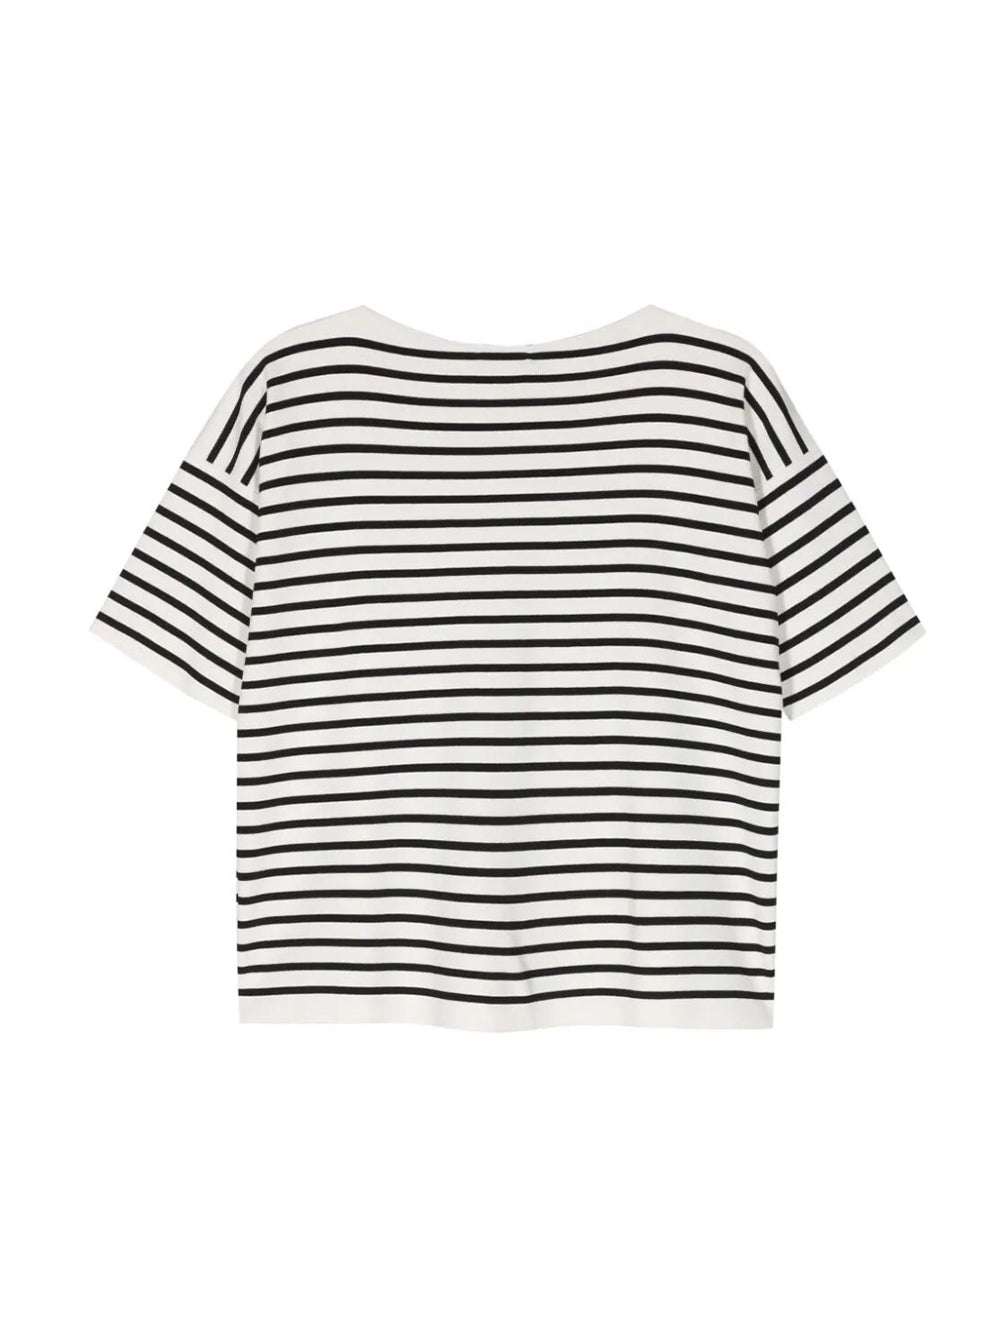 Striped top with boat neckline